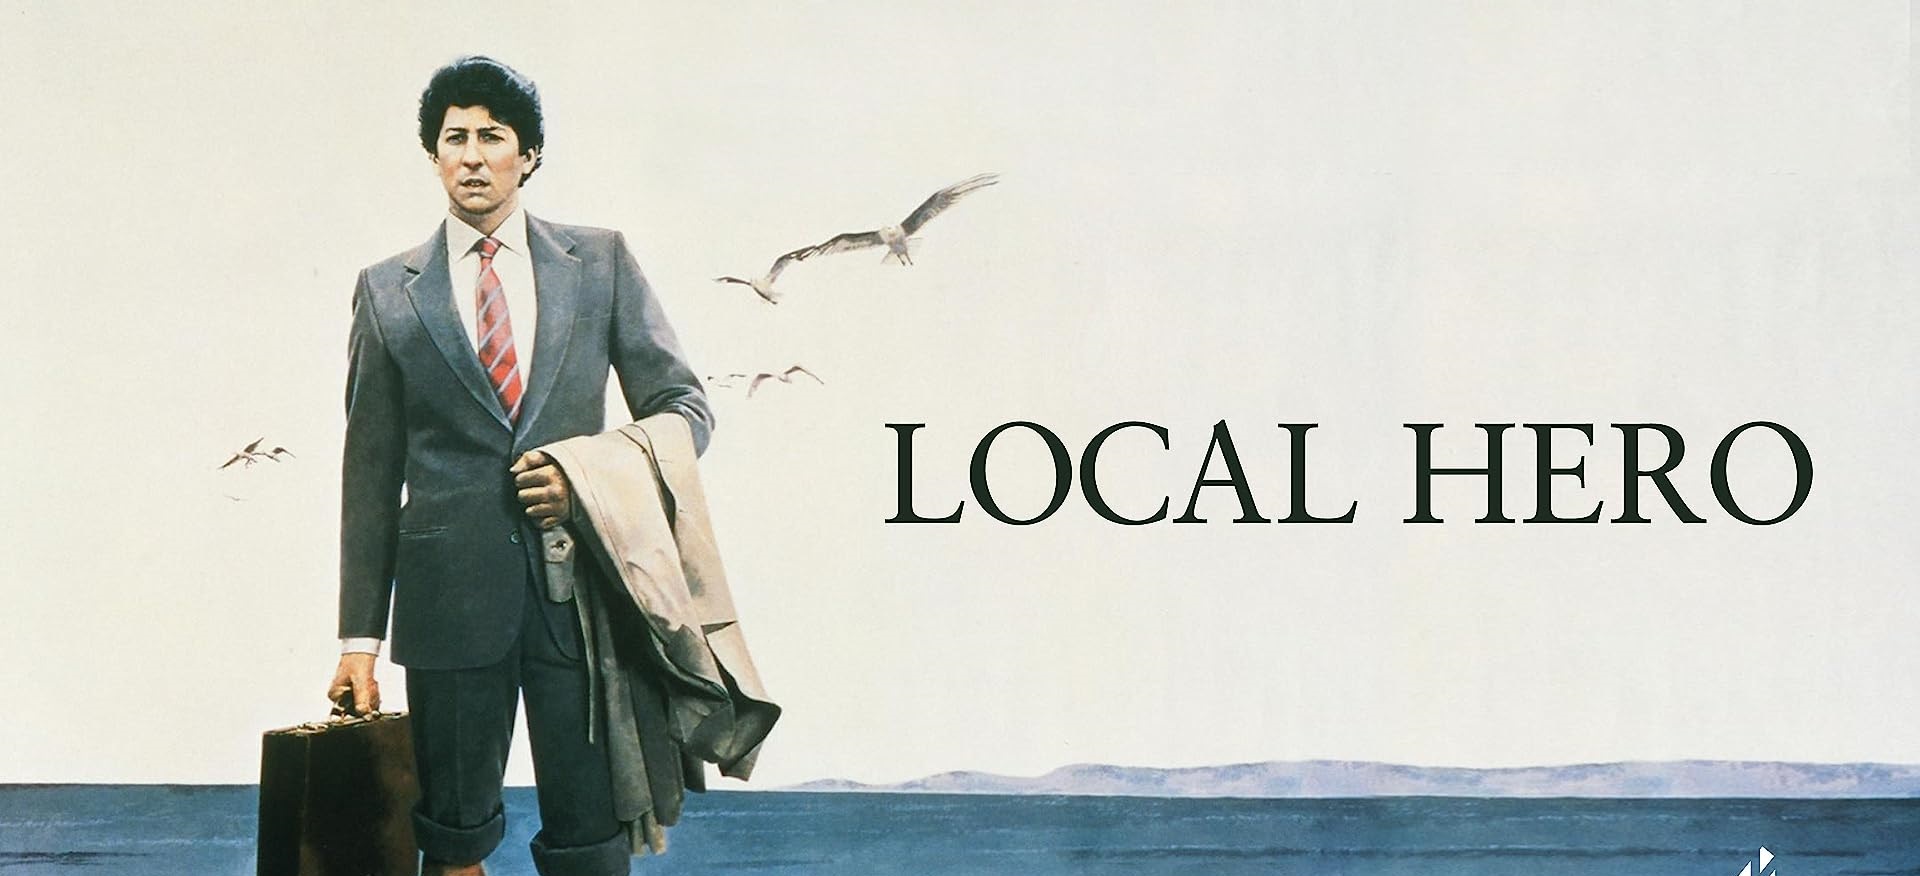 47-facts-about-the-movie-local-hero